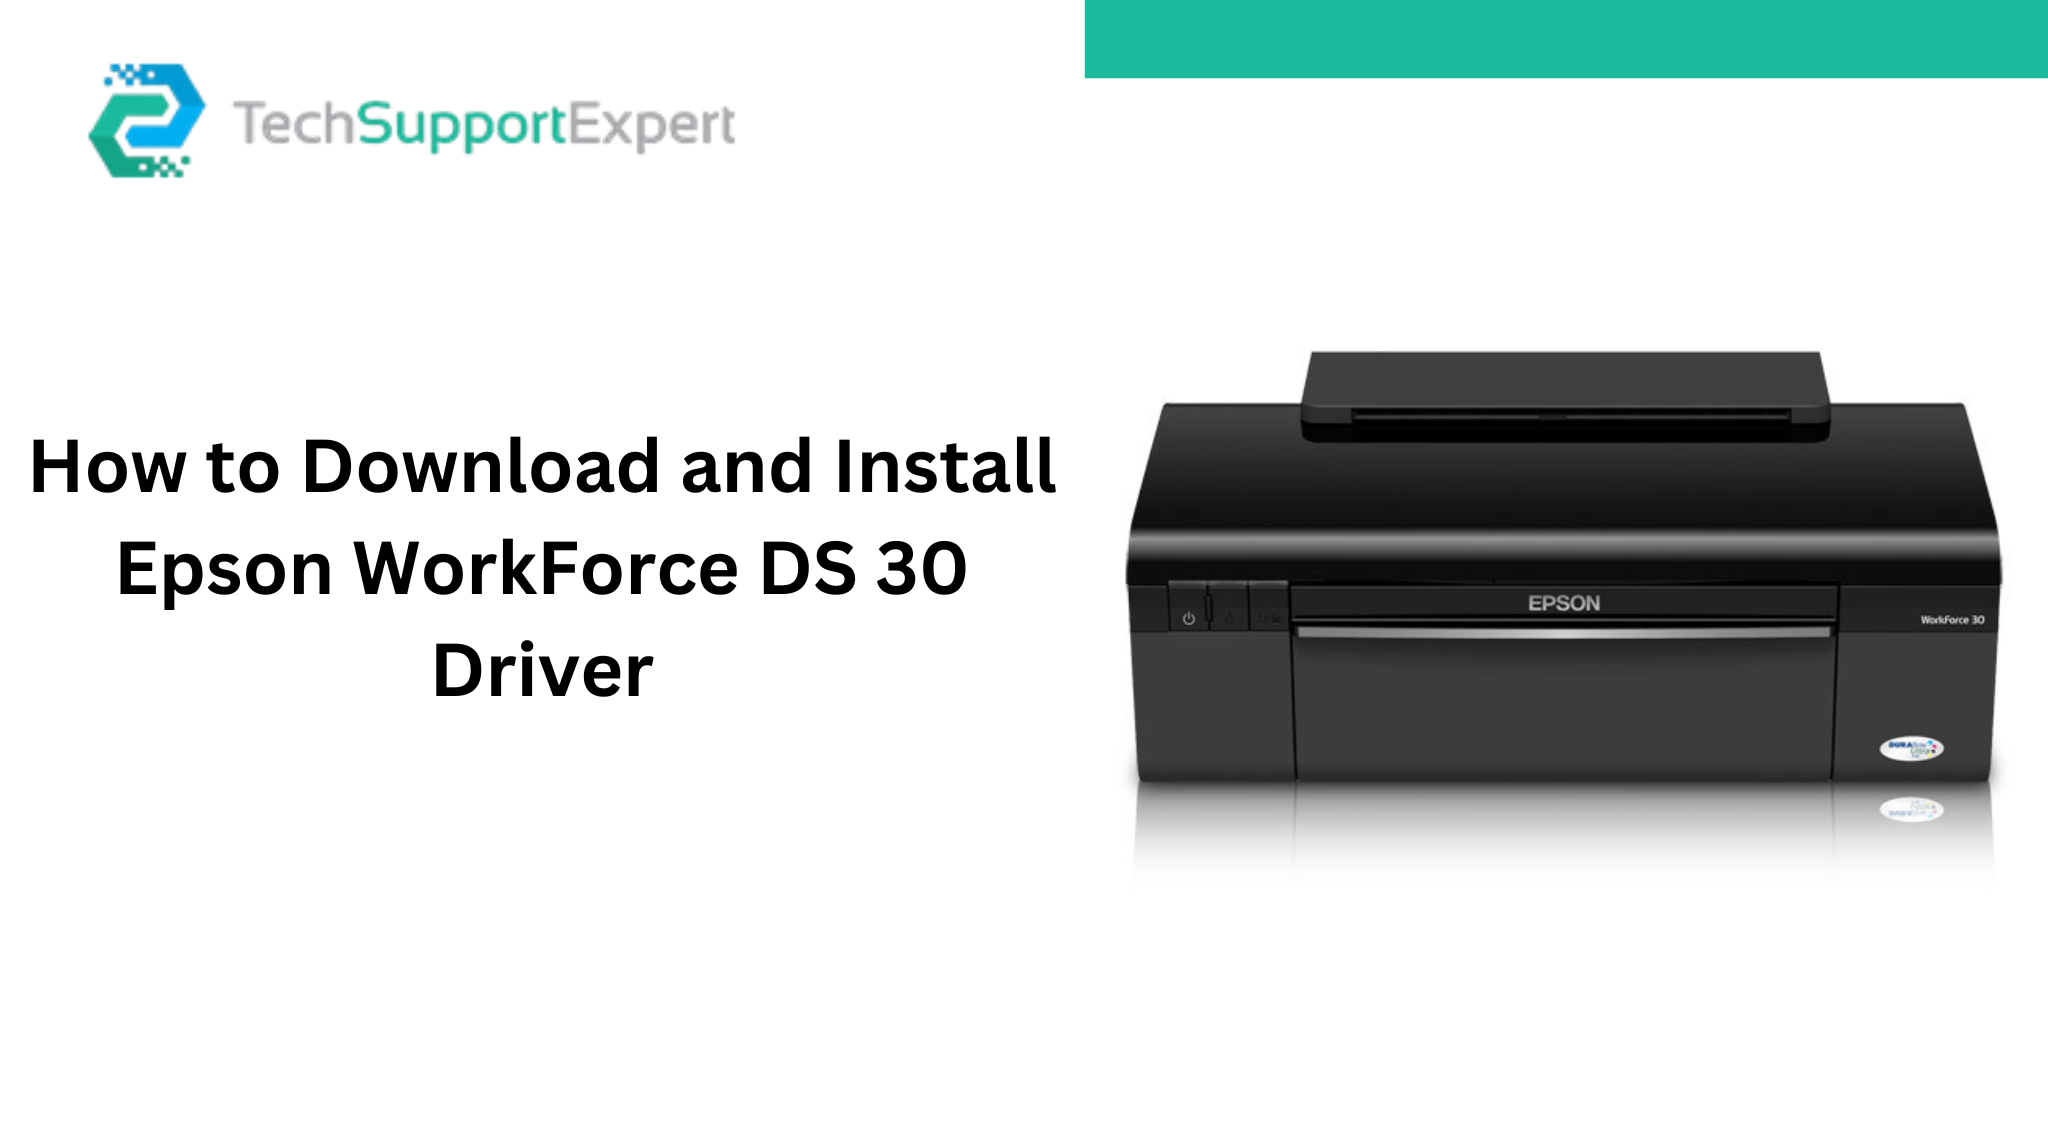 How to Download and Install Epson WorkForce DS 30 Driver